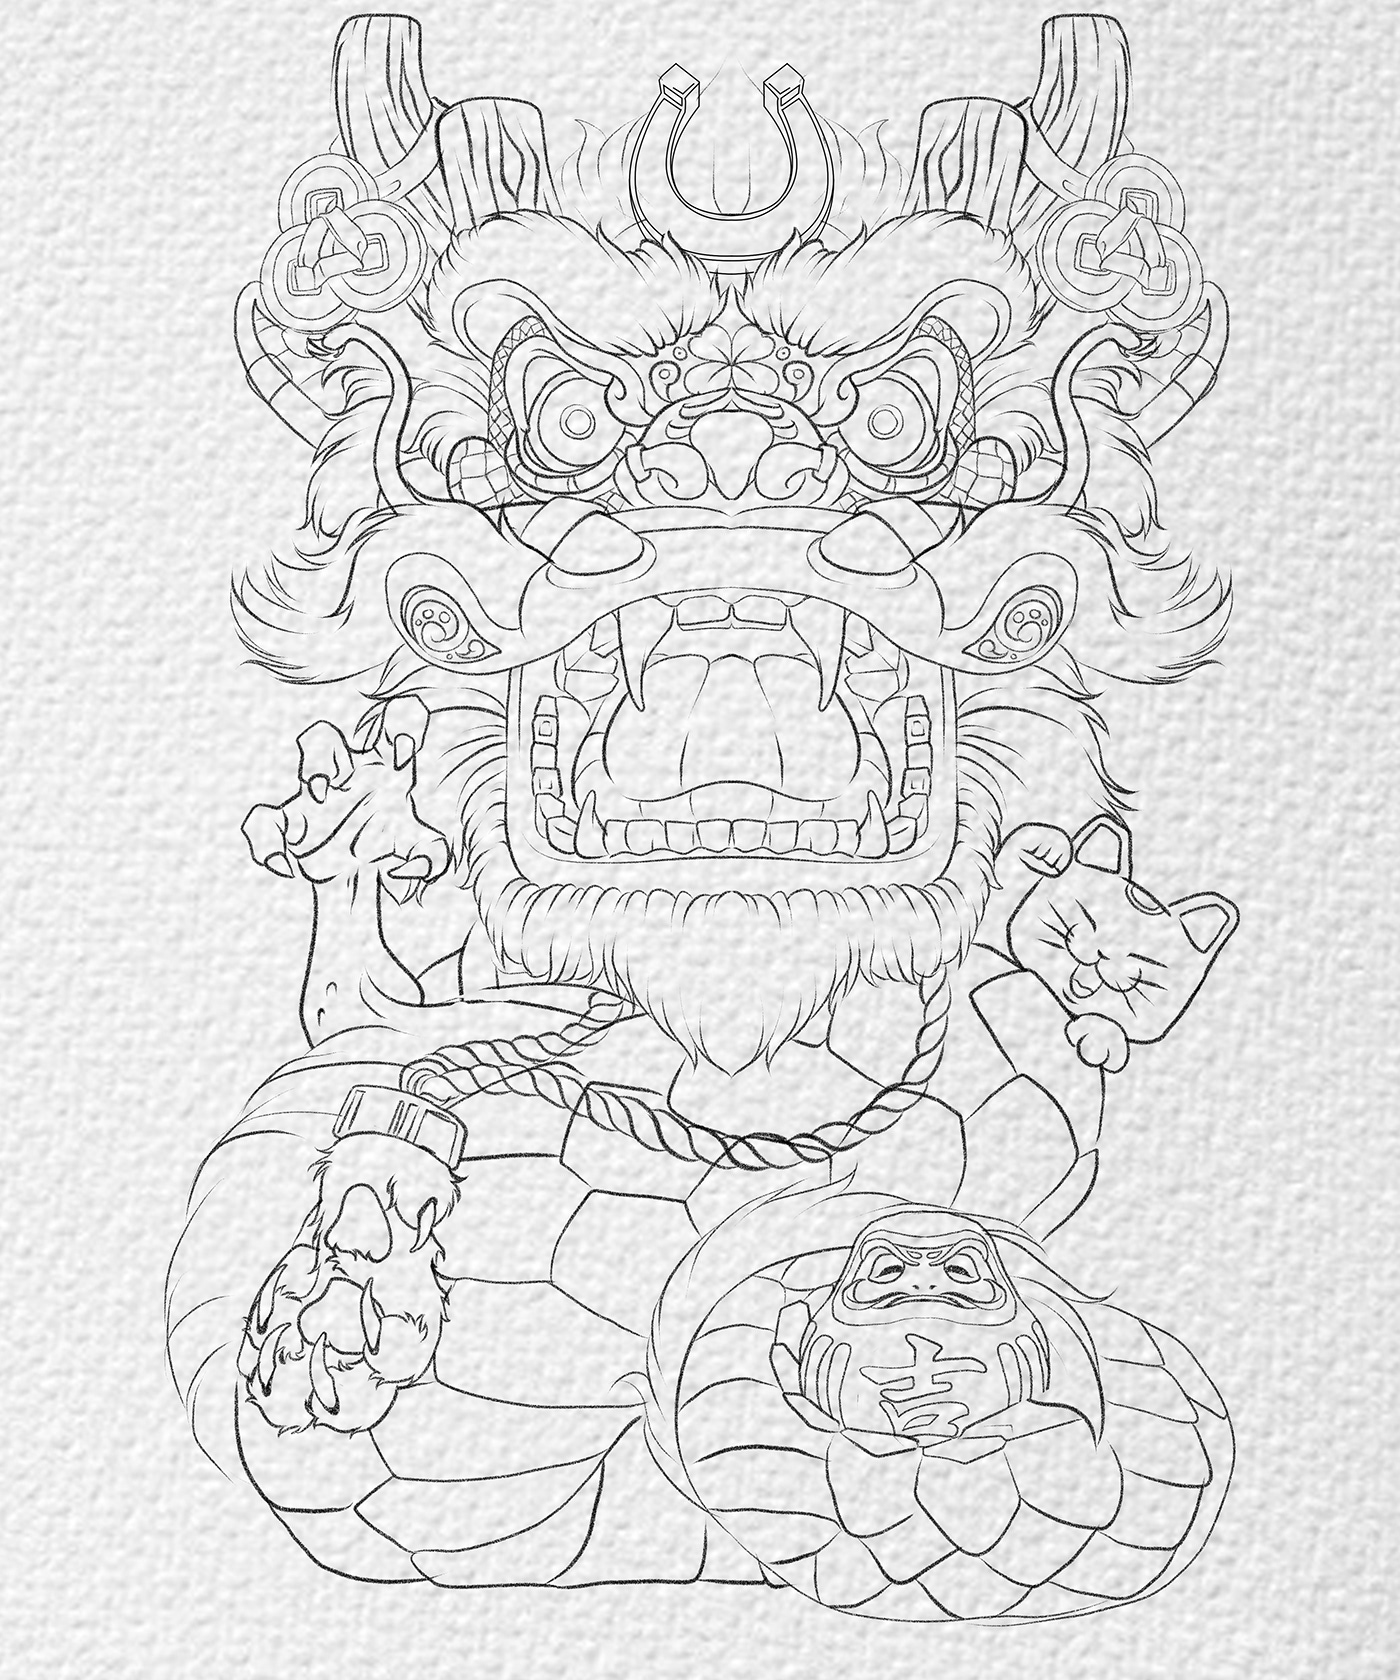 Good Luck year of the dragon dragon chinese zodiac lucky charm Digital Art  ILLUSTRATION  Graphic Designer design for sale lucky